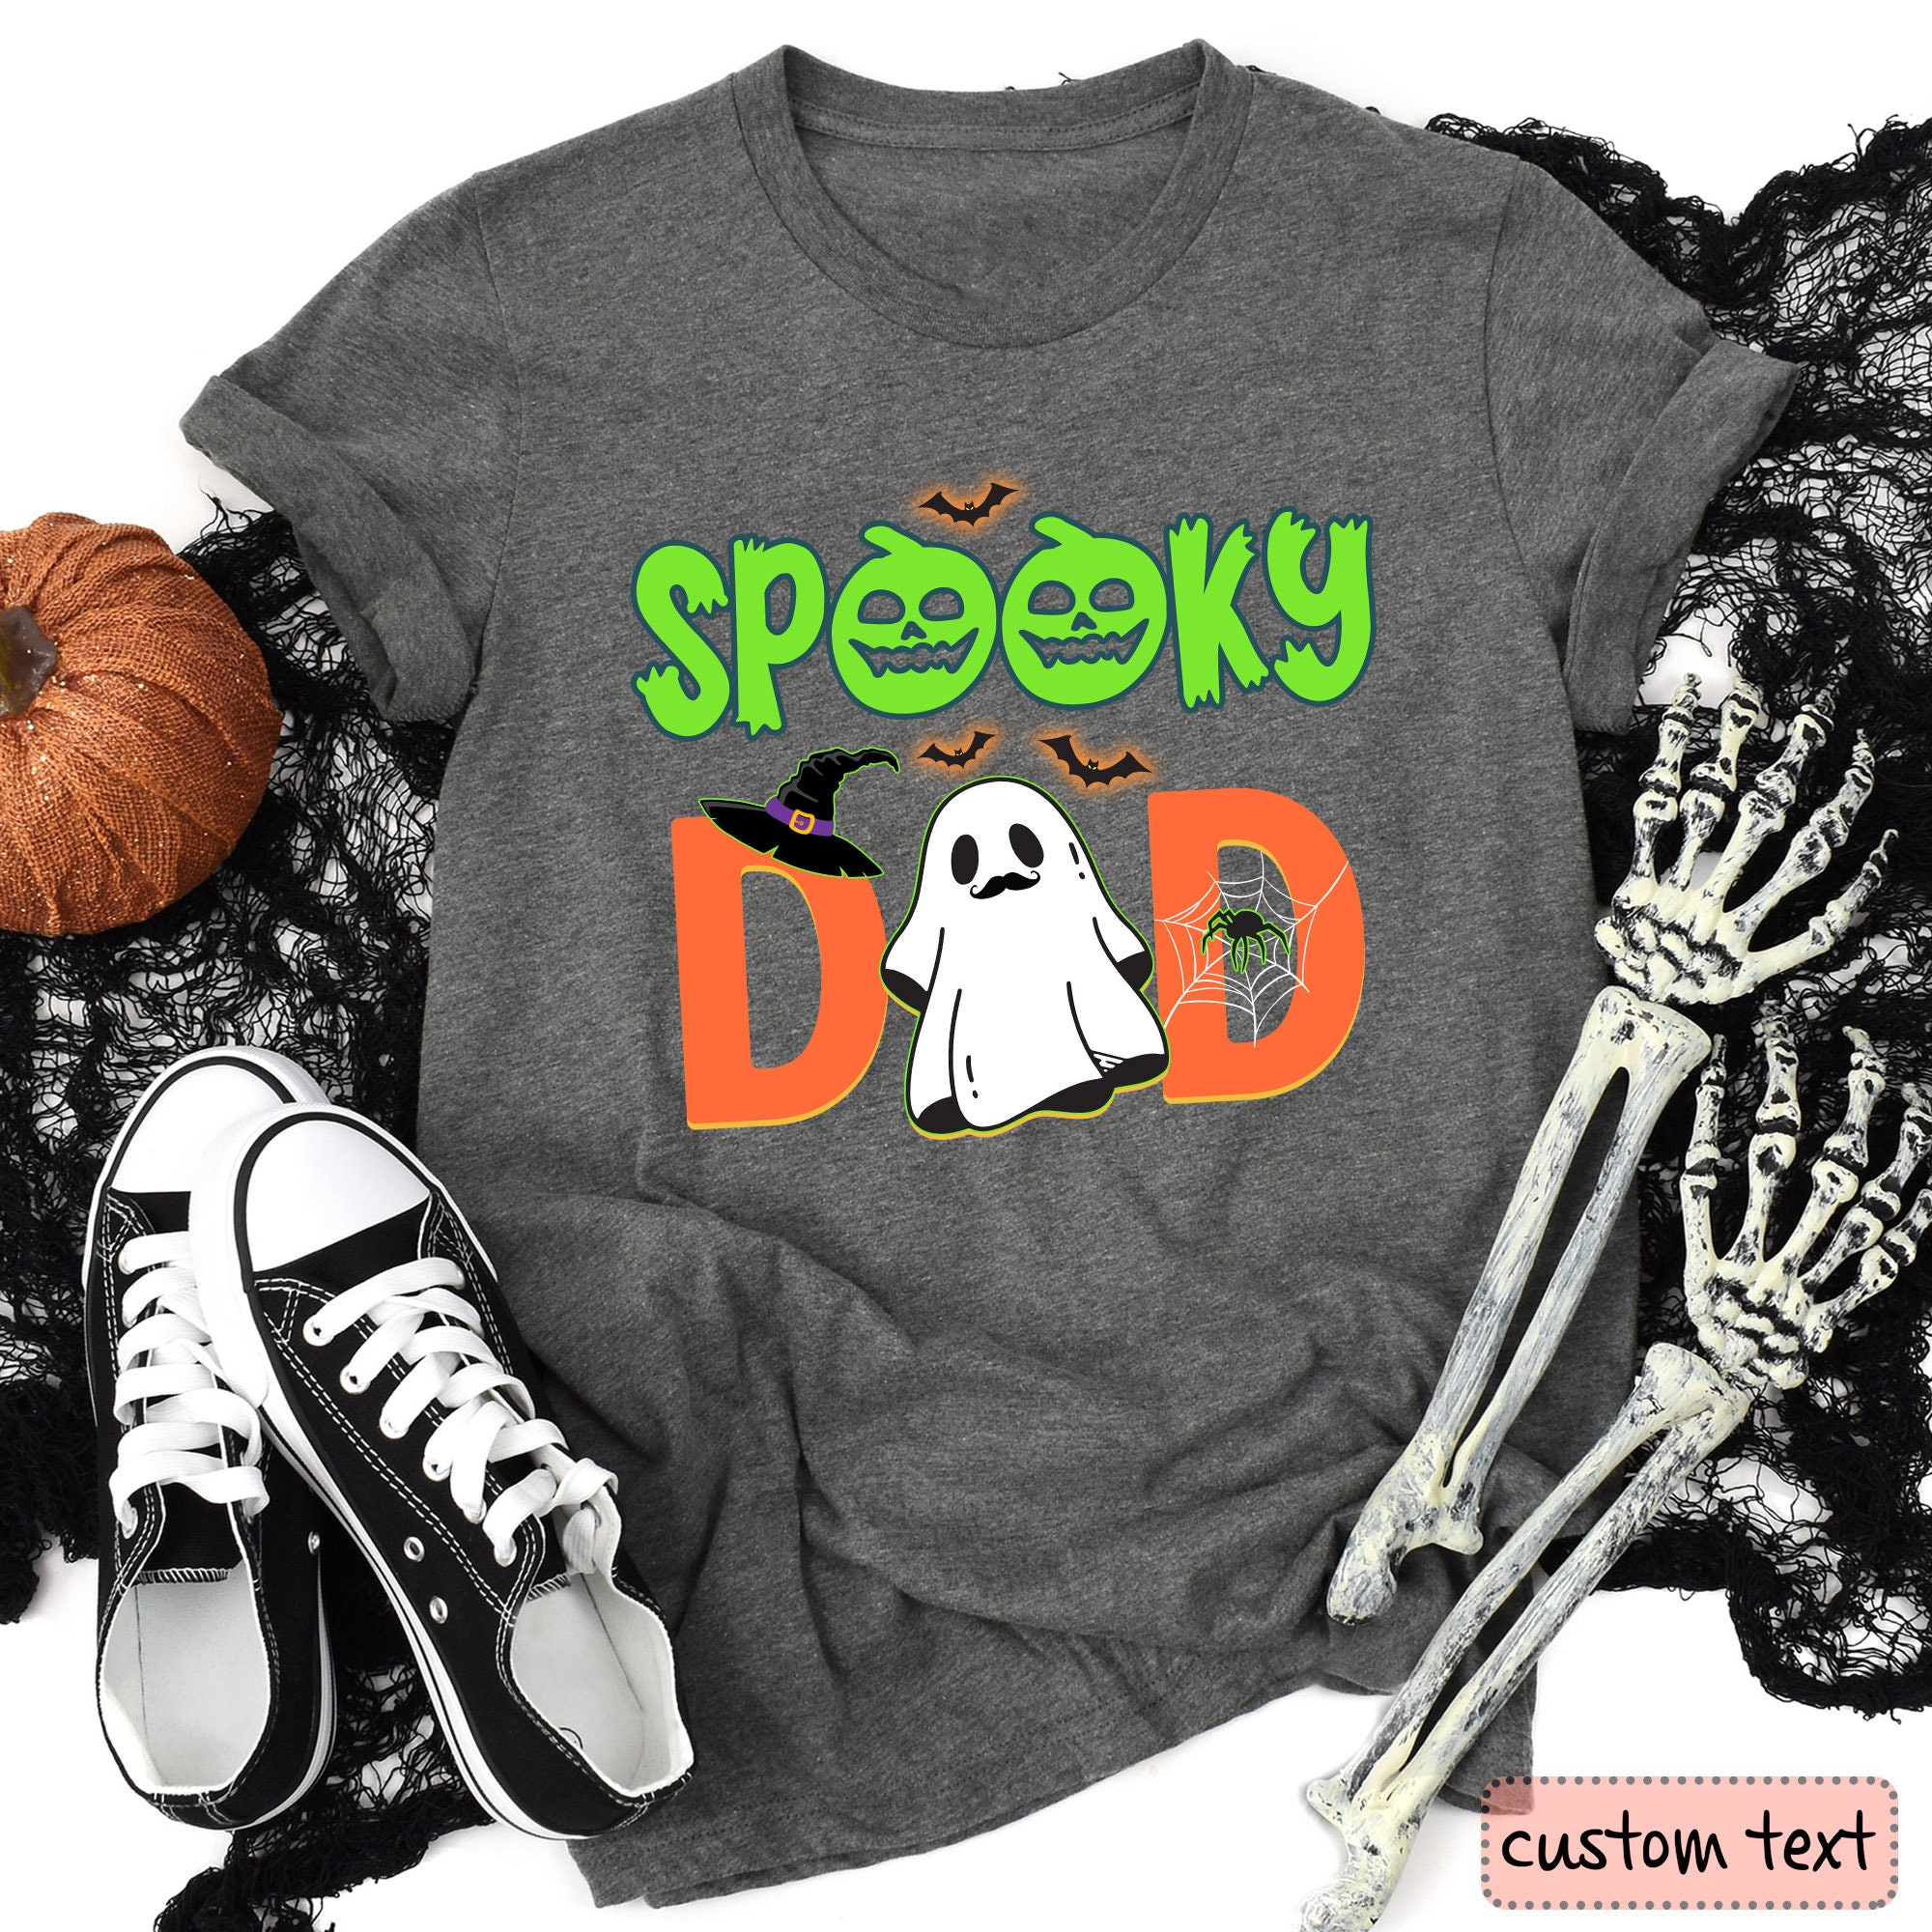 Discover Spooky Family Shirt, Halloween Family Shirt, Halloween Matching Outfit, Momster Tee, Family Matching Shirts